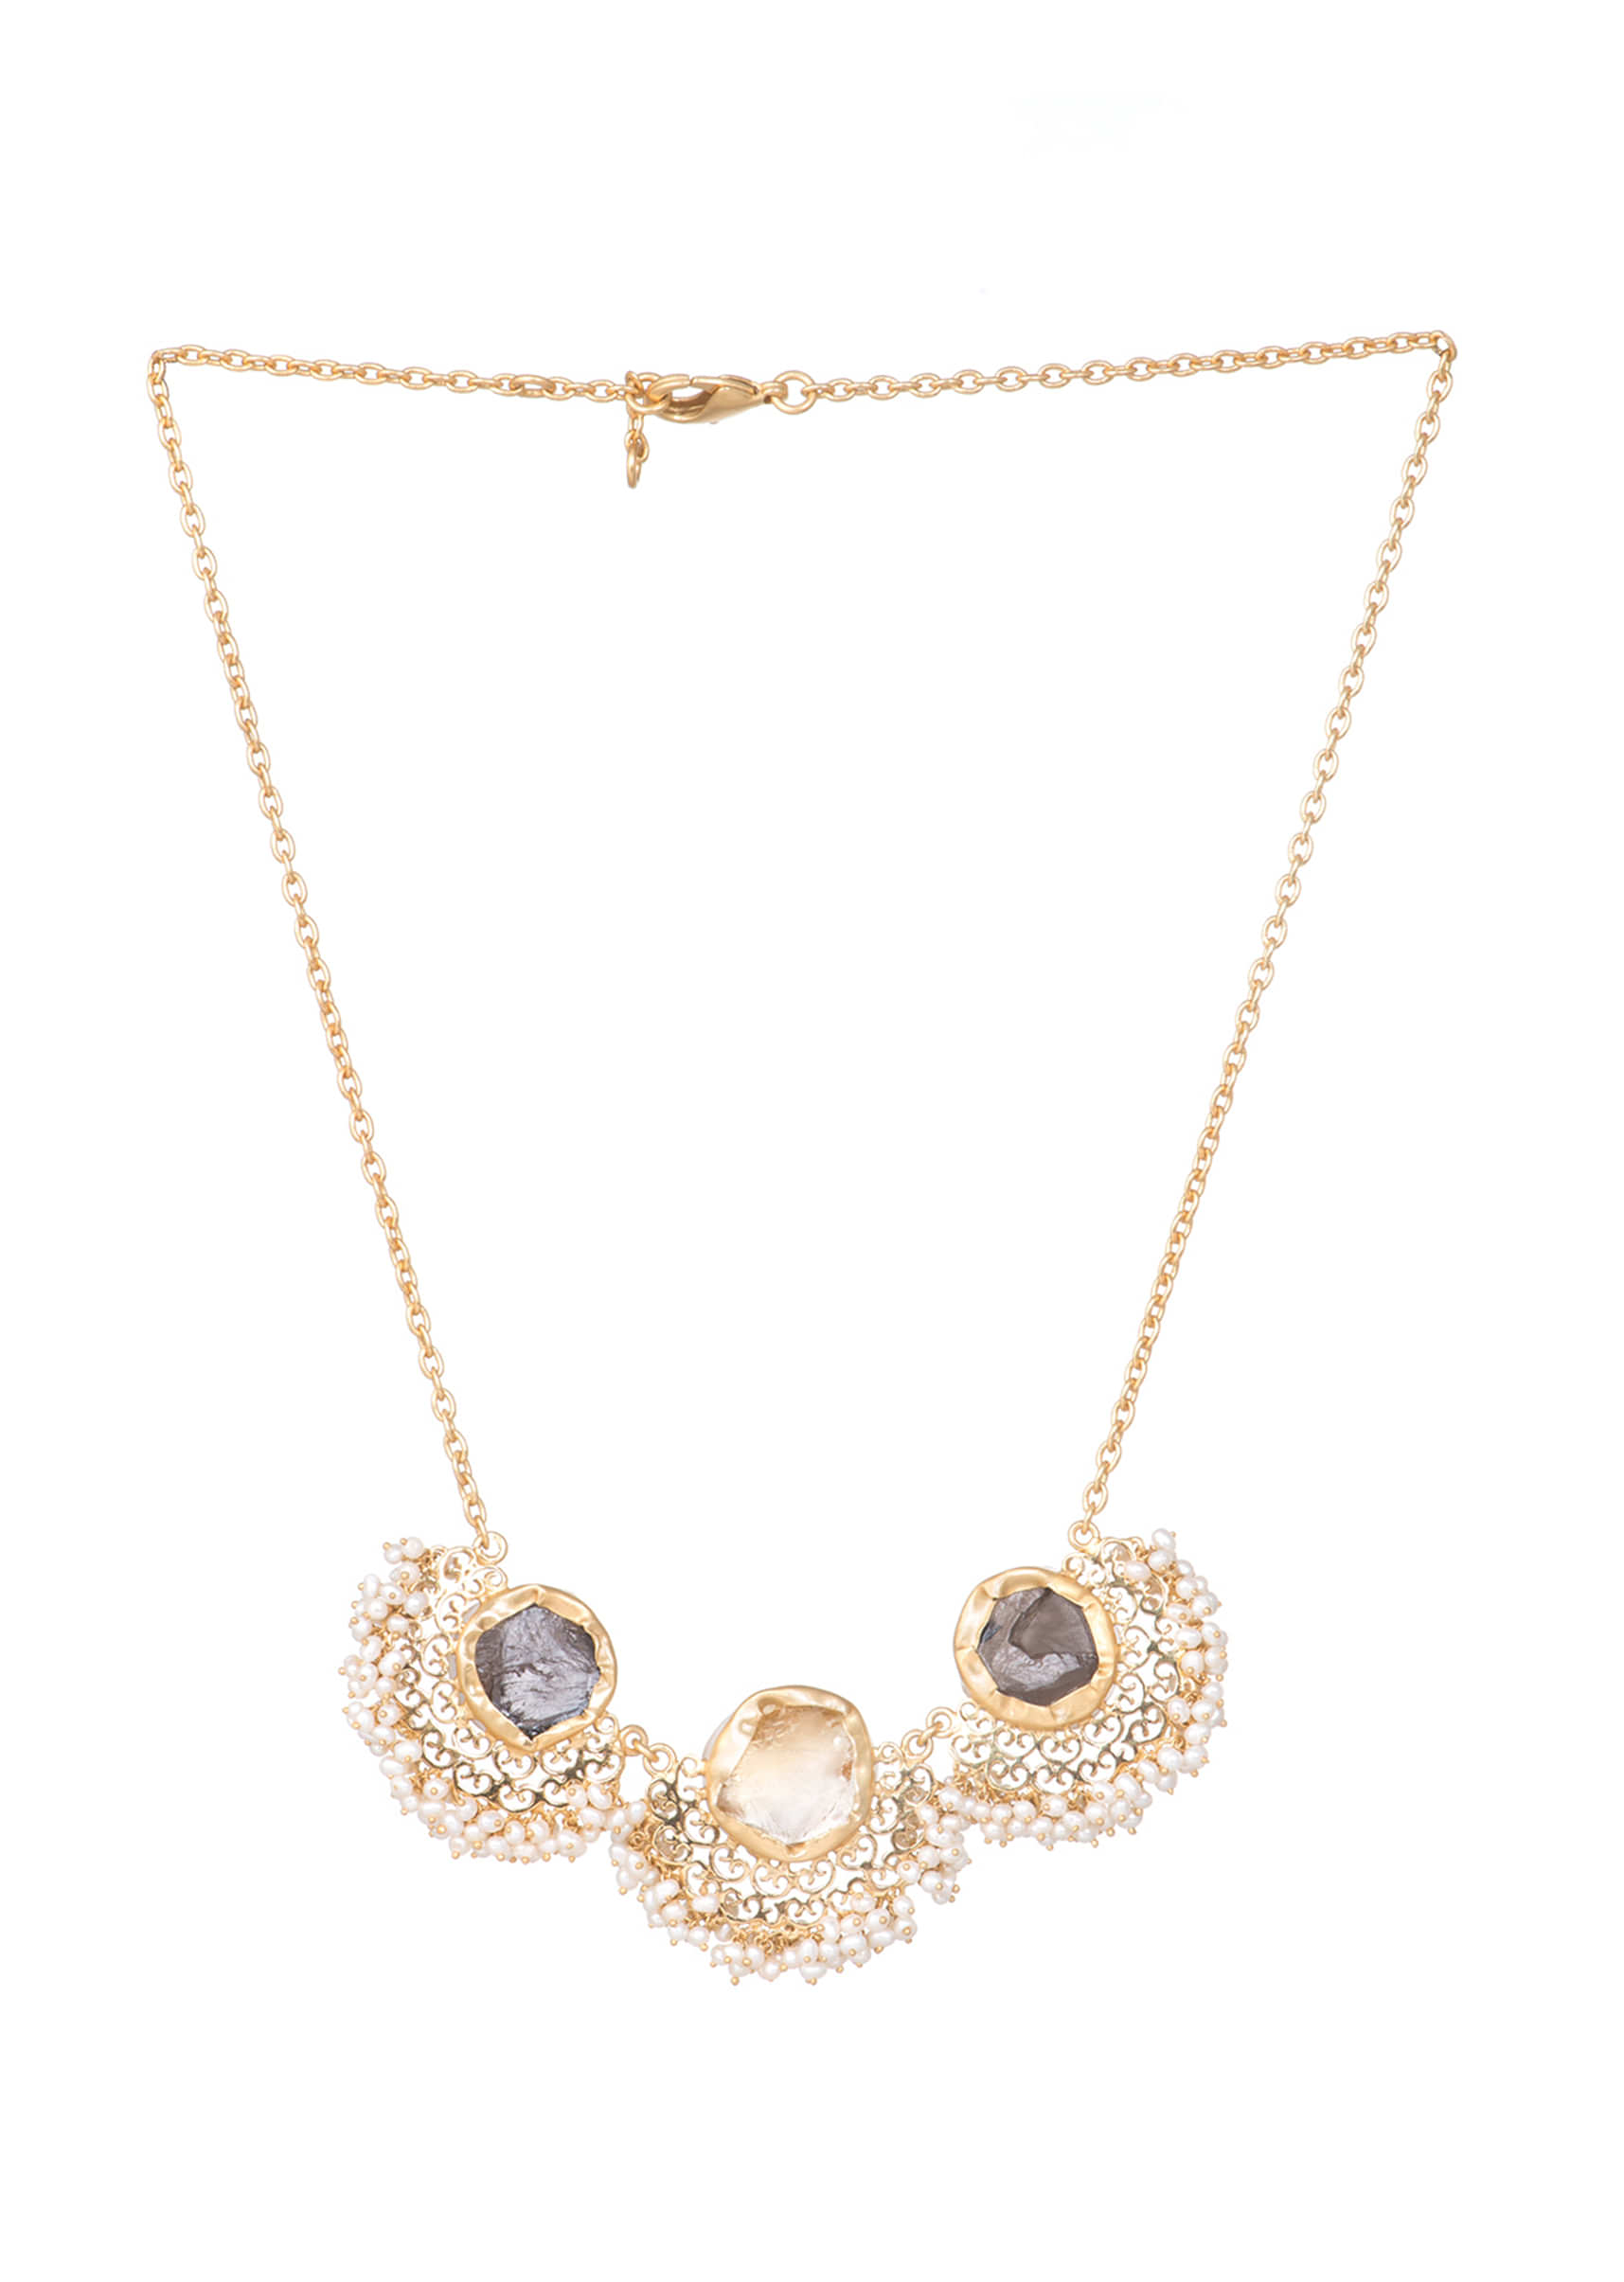 Gold Plated Necklace With Filigree Design And Studded With Smoky Topaz And Citrine By Zariin